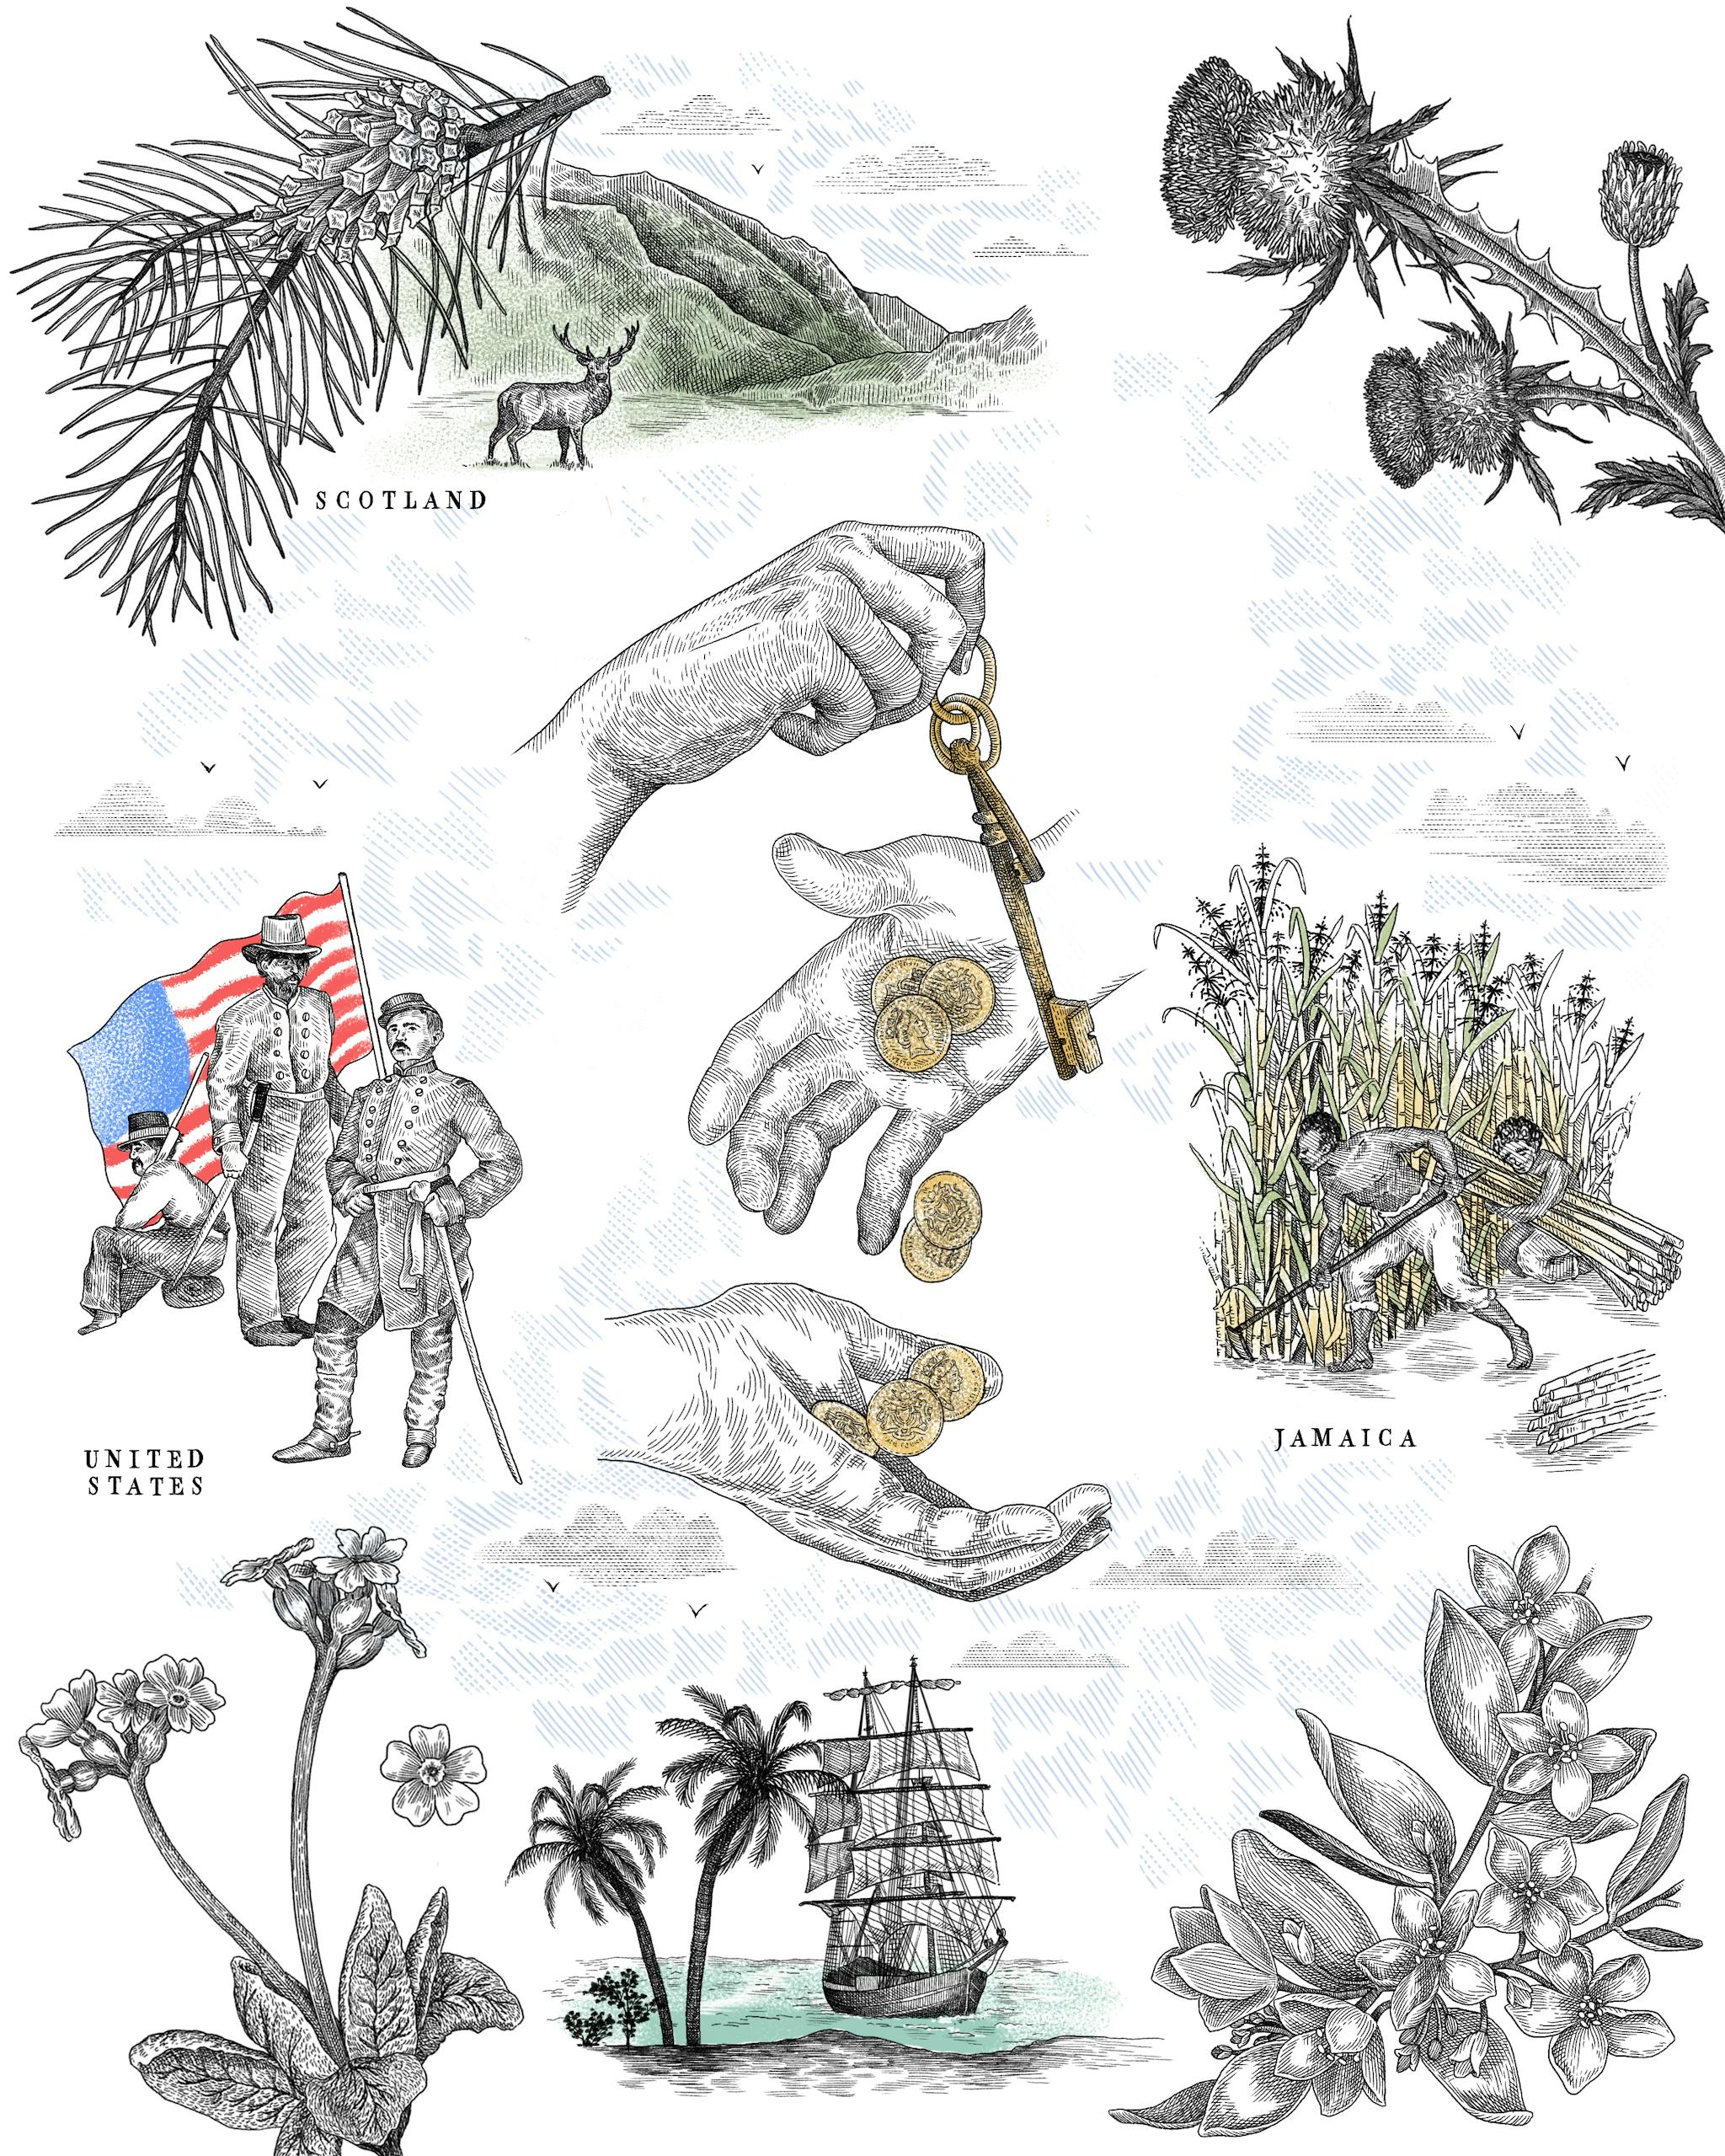 Several illustrations representing trades between Scotland, United States and Jamaica.